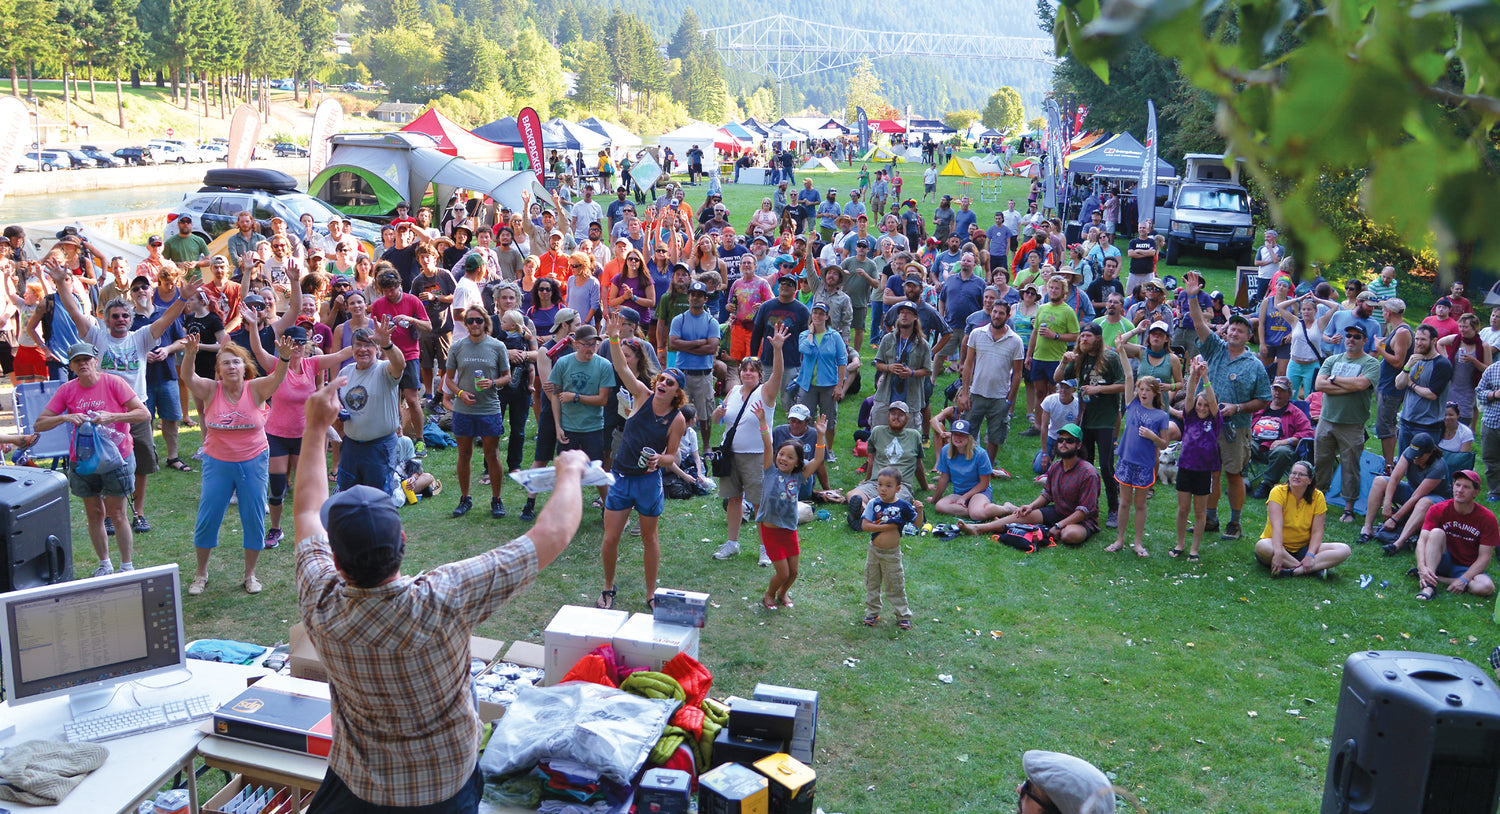 A large crowd of people reaching for prizes at a festival